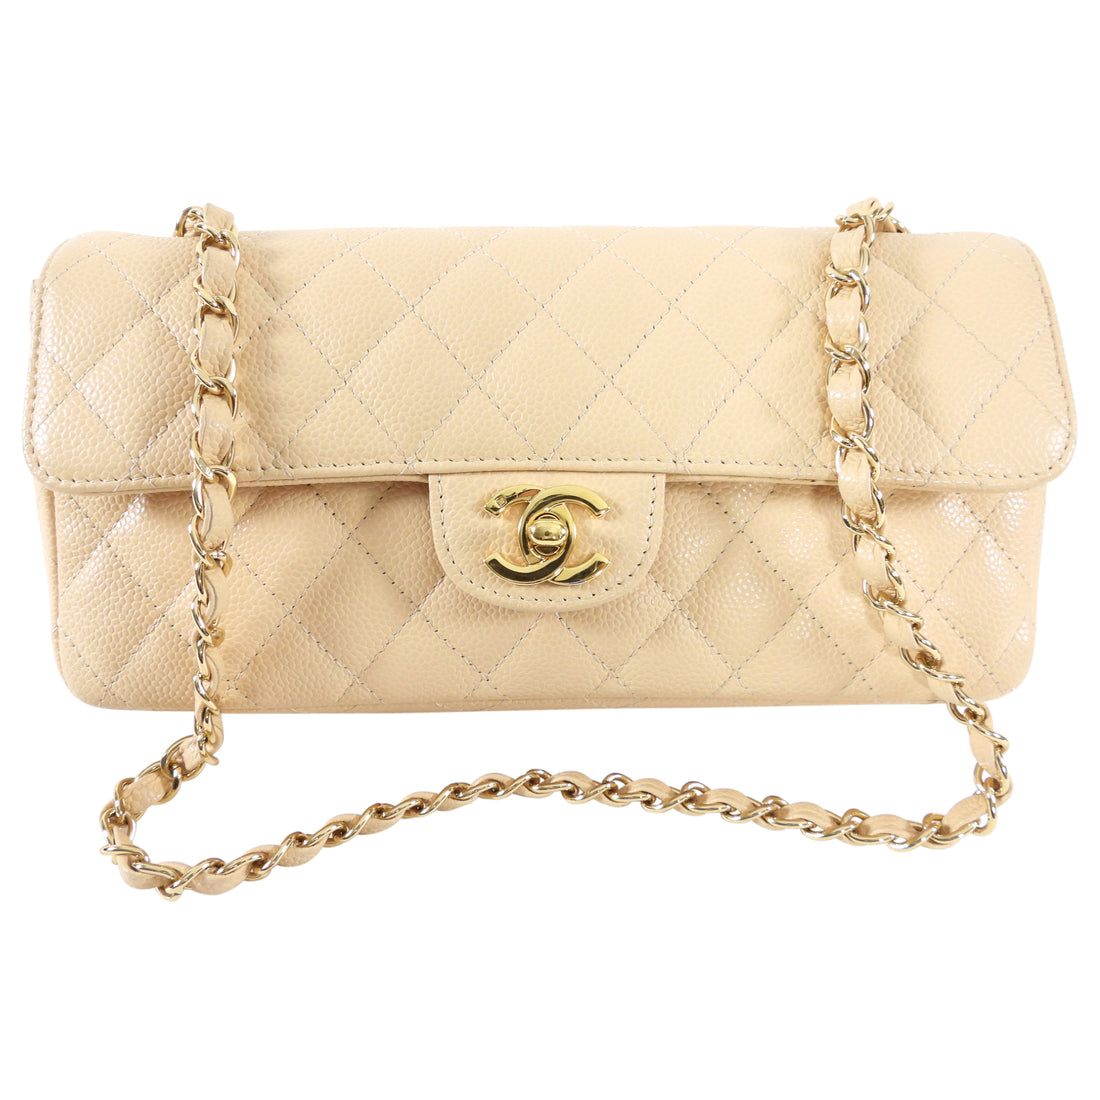 Chanel Beige Caviar Leather East West Small Classic Flap Bag – I